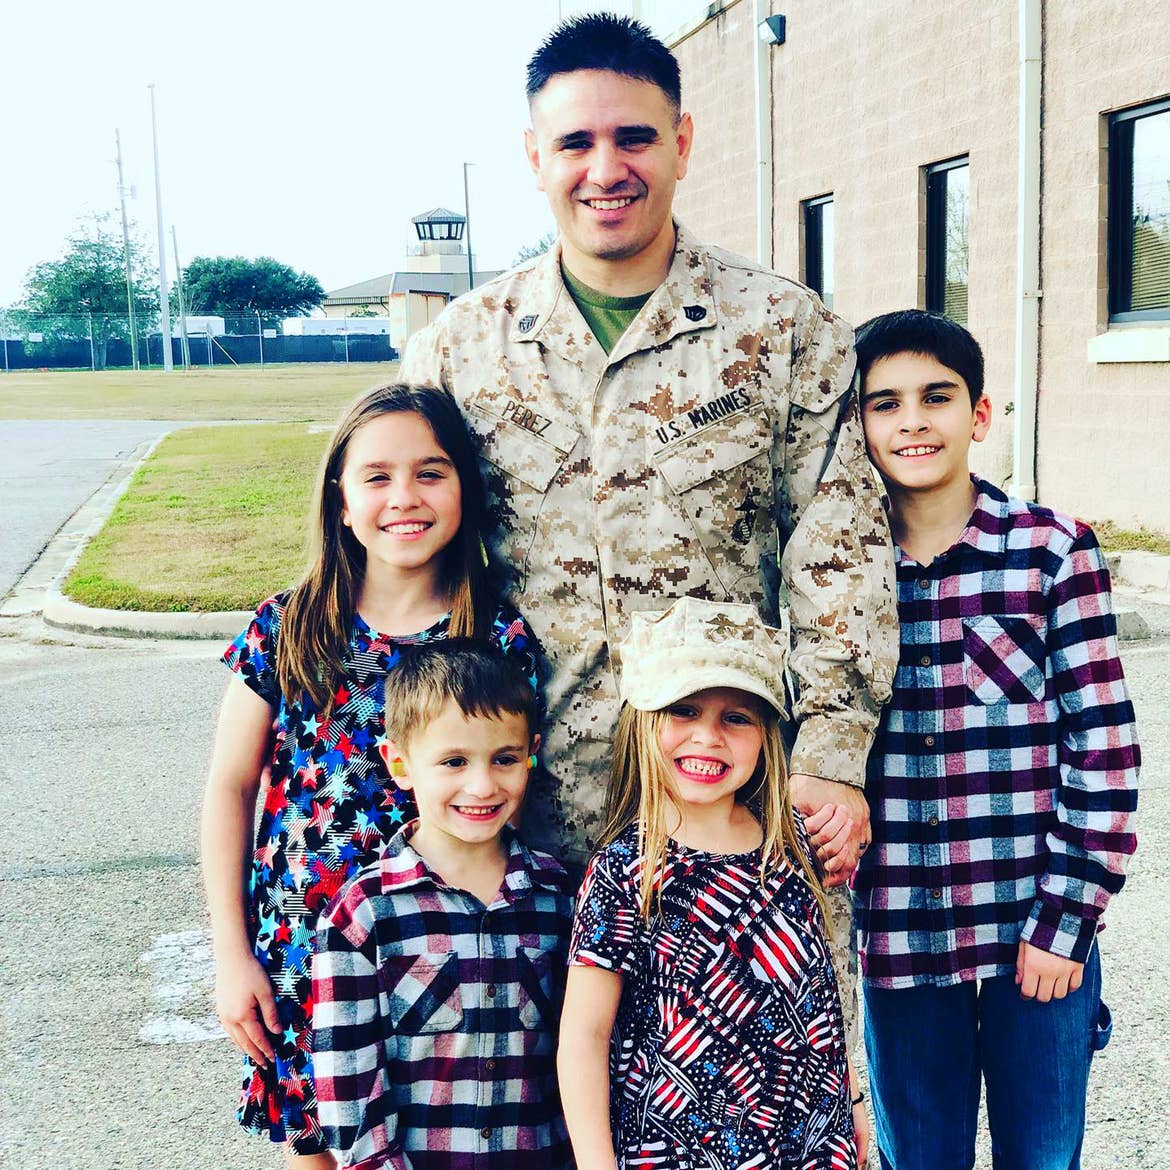 Featured Member, Sara Perezes children stand with their father, Sgt. Tommy Perez Jr. outdoors near a facility.